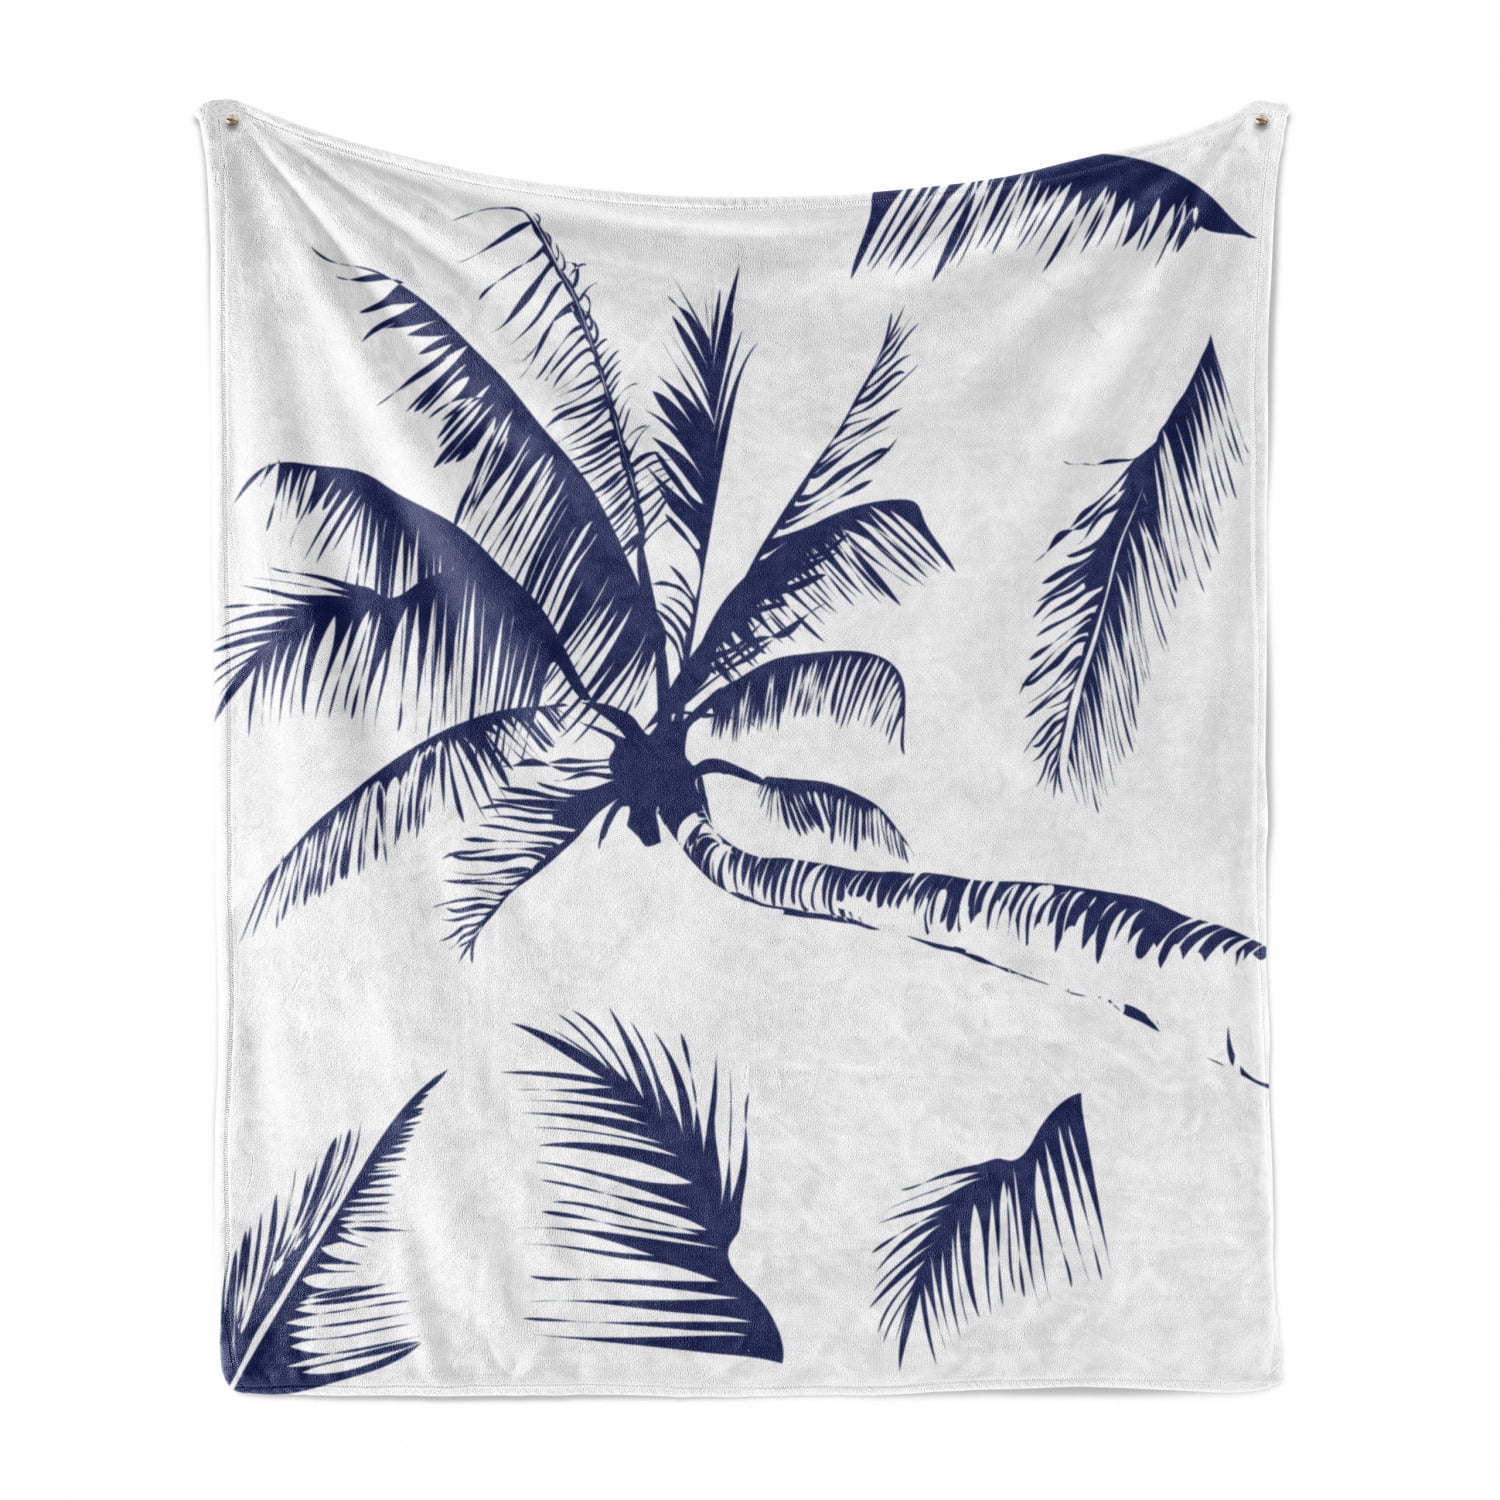 for Indoor Use Tropical Nature and Silhouette Coconut Palm Tree Ultra-Soft Micro Fleece Blanket,A Blanket That Can Be Used in All Seasons for Use in Cars.Soft and Comfortable.60 X50 